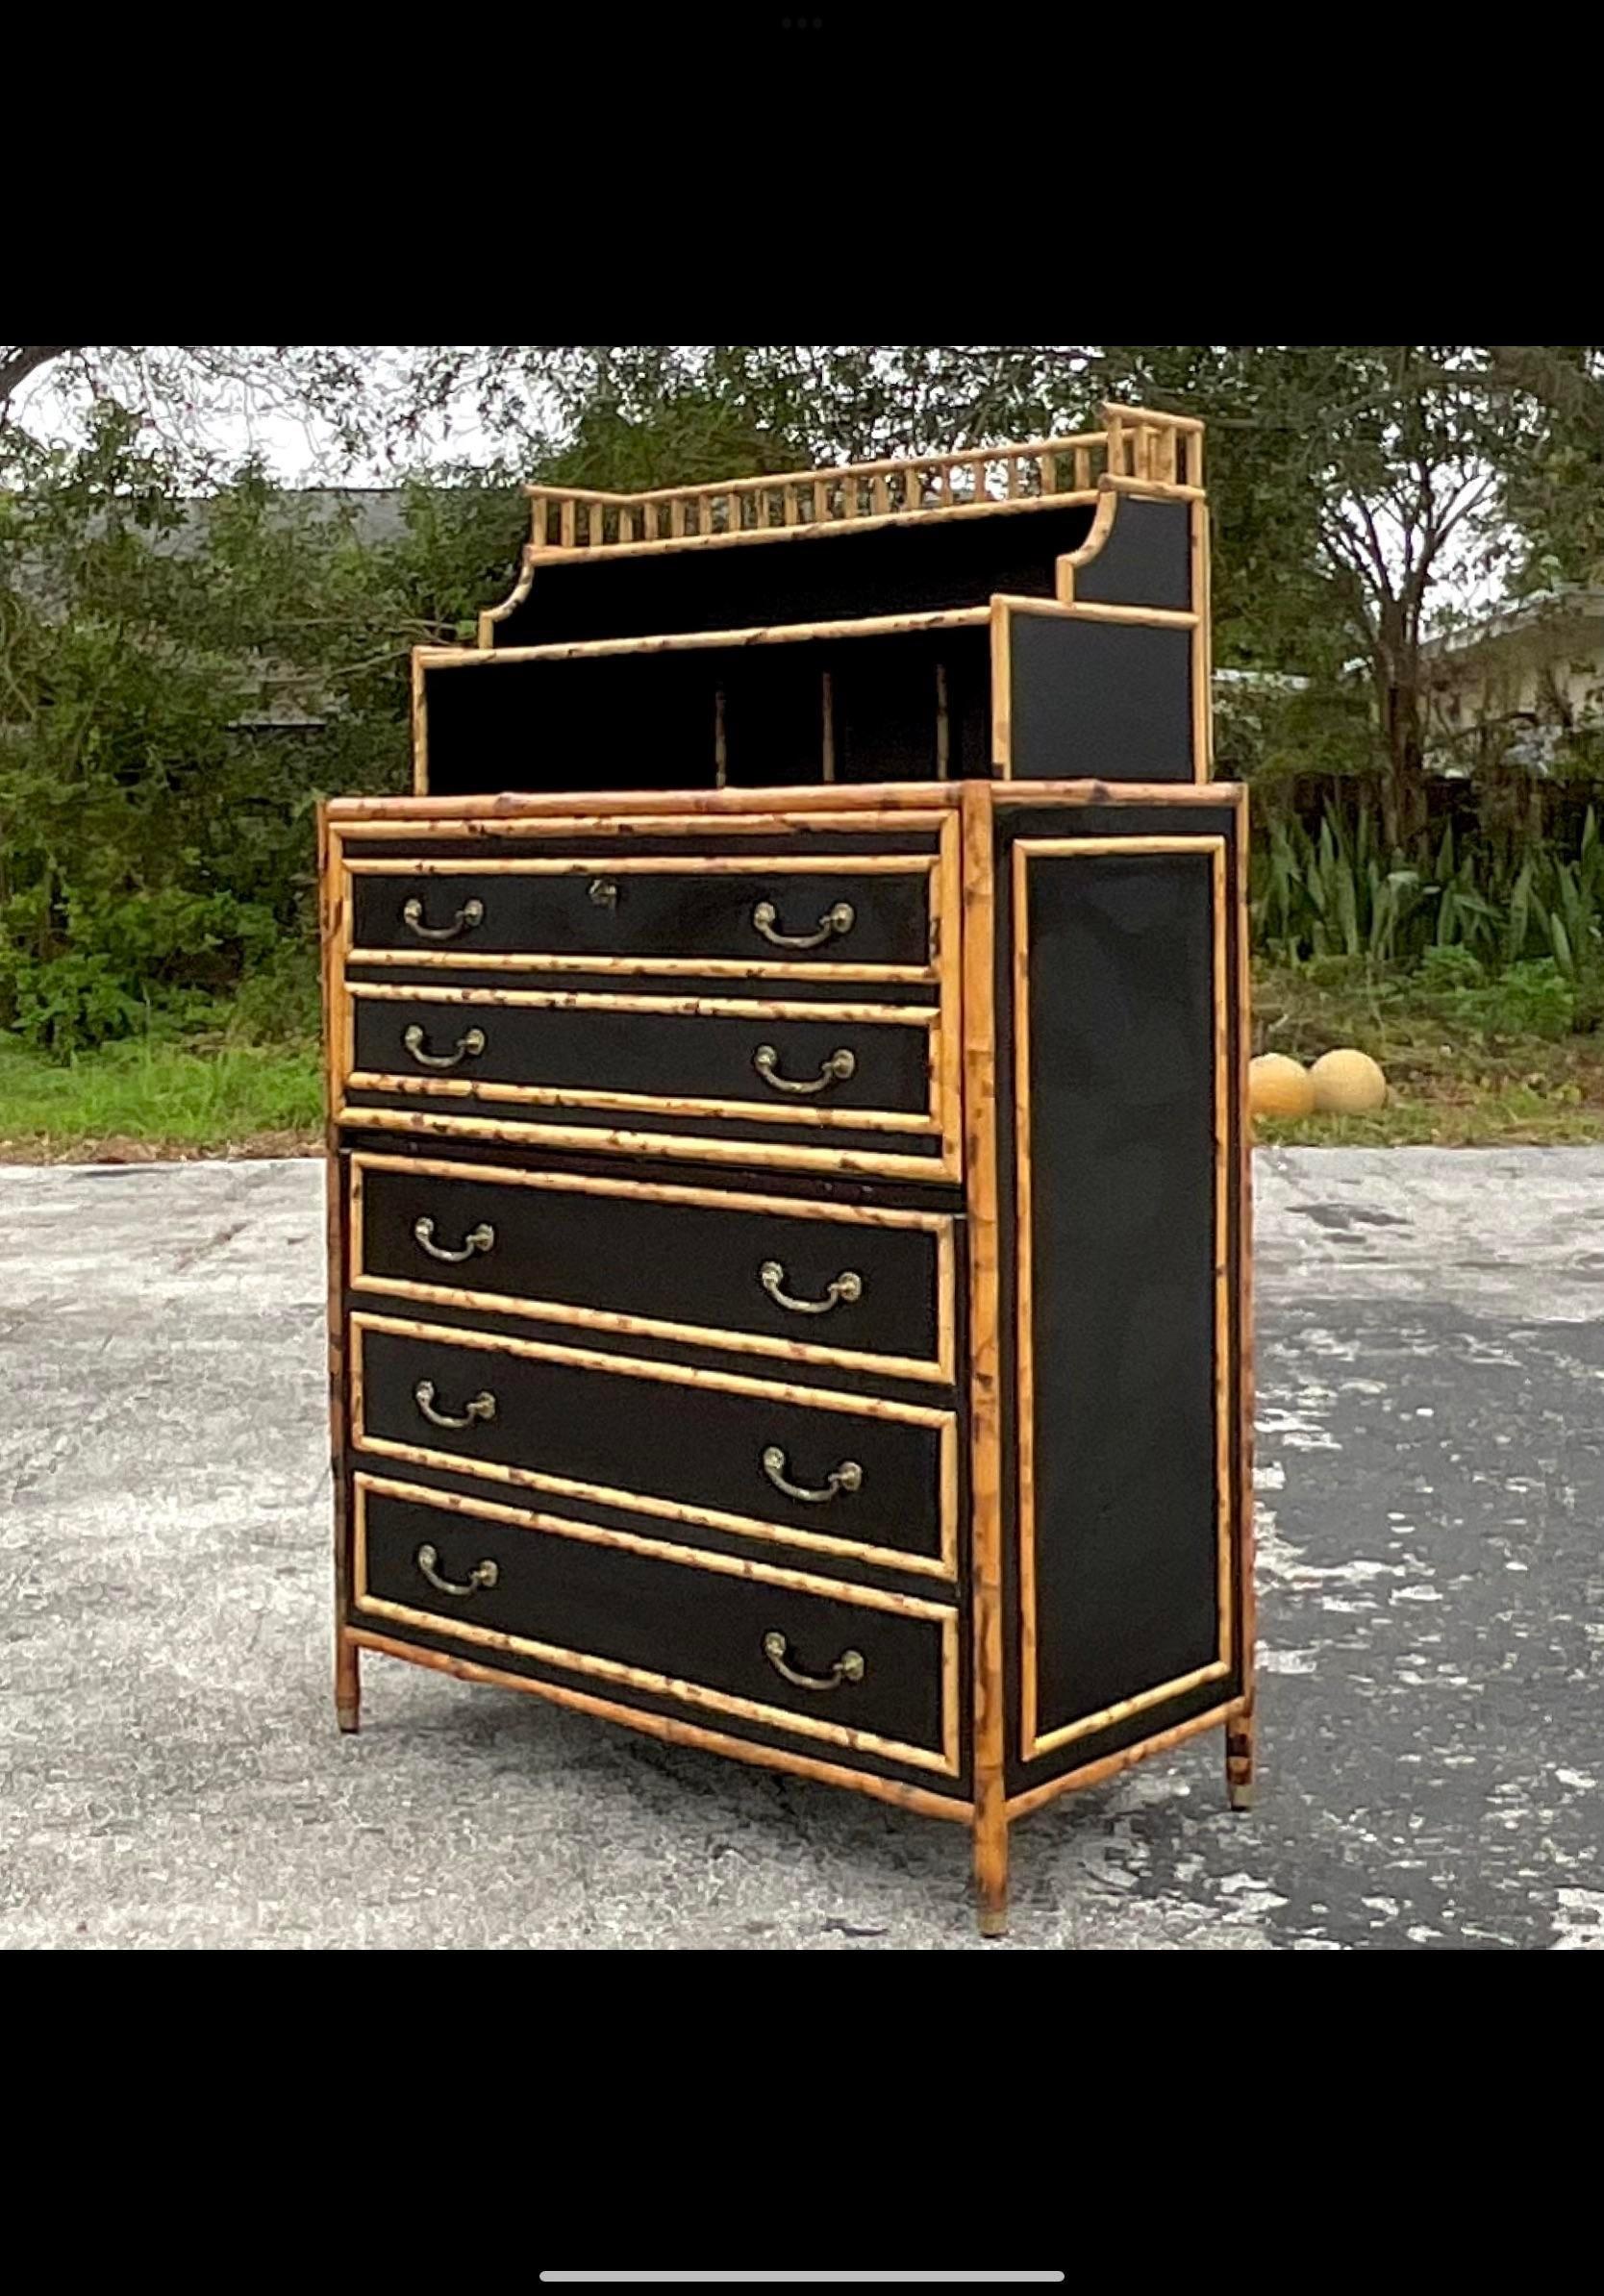 A fantastic vintage Coastal Secretary desk. A chic tortoise shell rattan bamboo with inset black laminate panels. Burnished brass hardware. Flip down desk top with a wrapped leather top. Acquired from a Palm Beach estate.